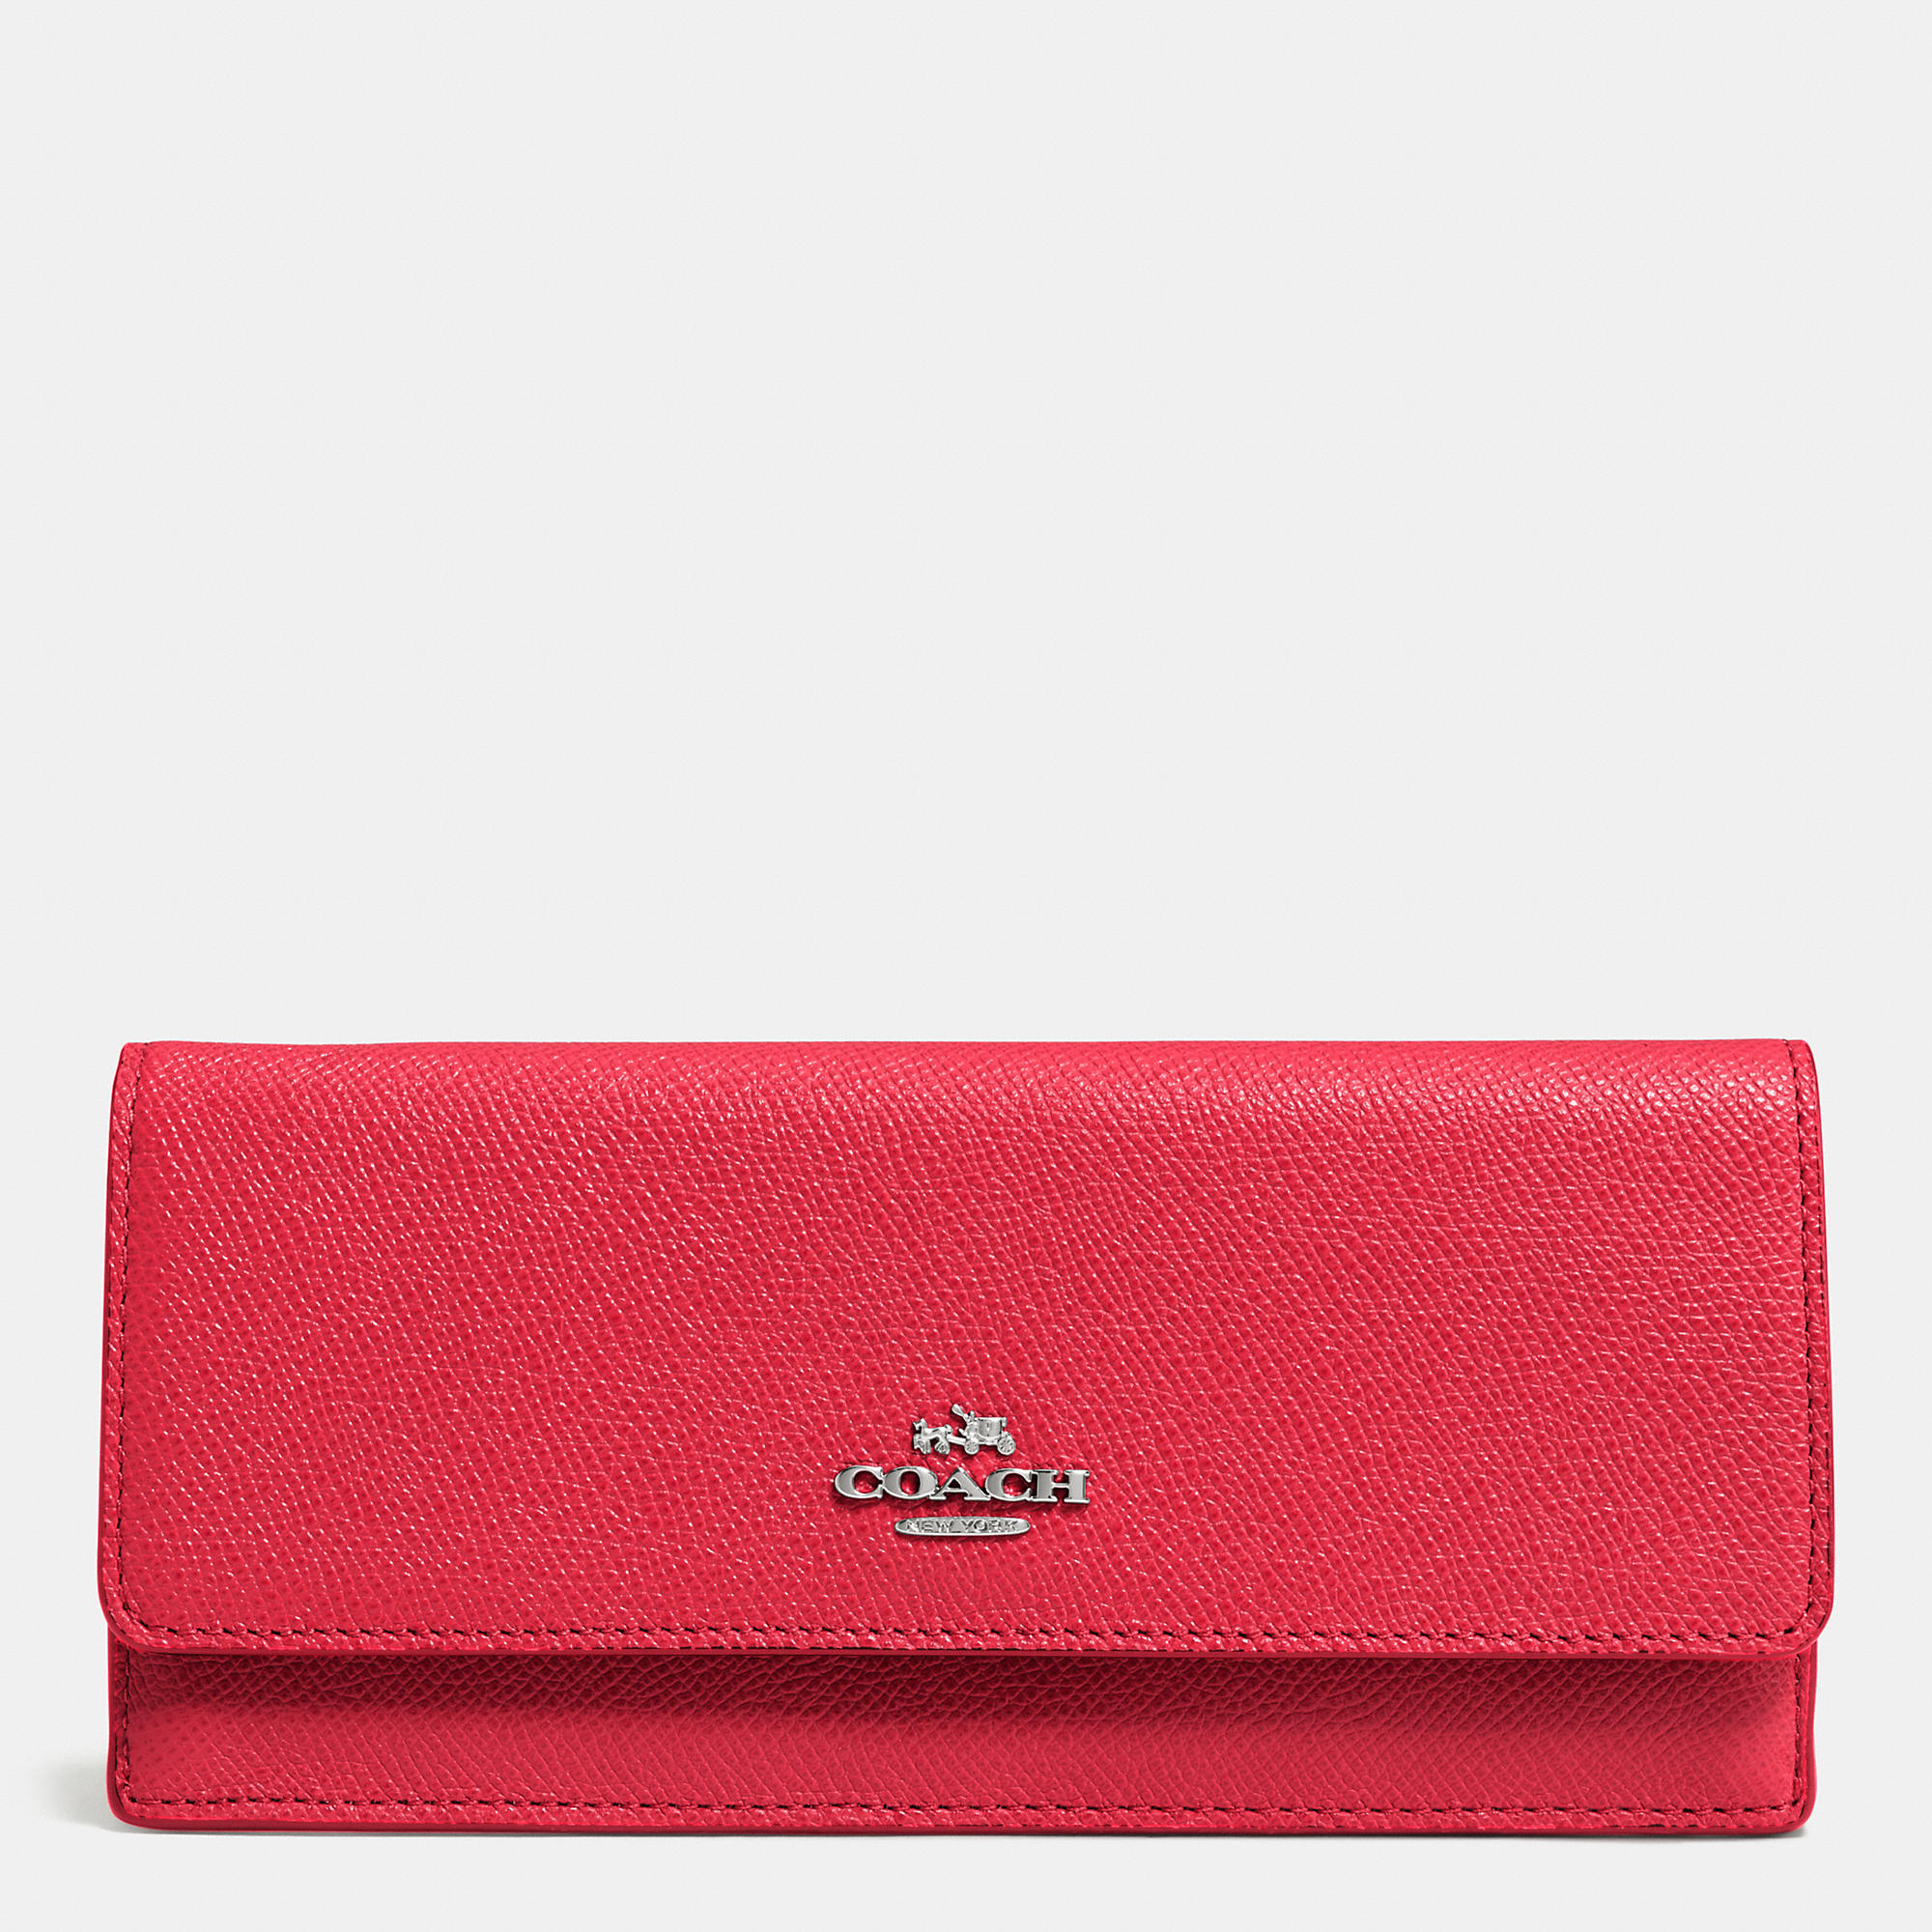 Worldwide Hot Sale Coach Soft Wallet In Embossed Textured Leather